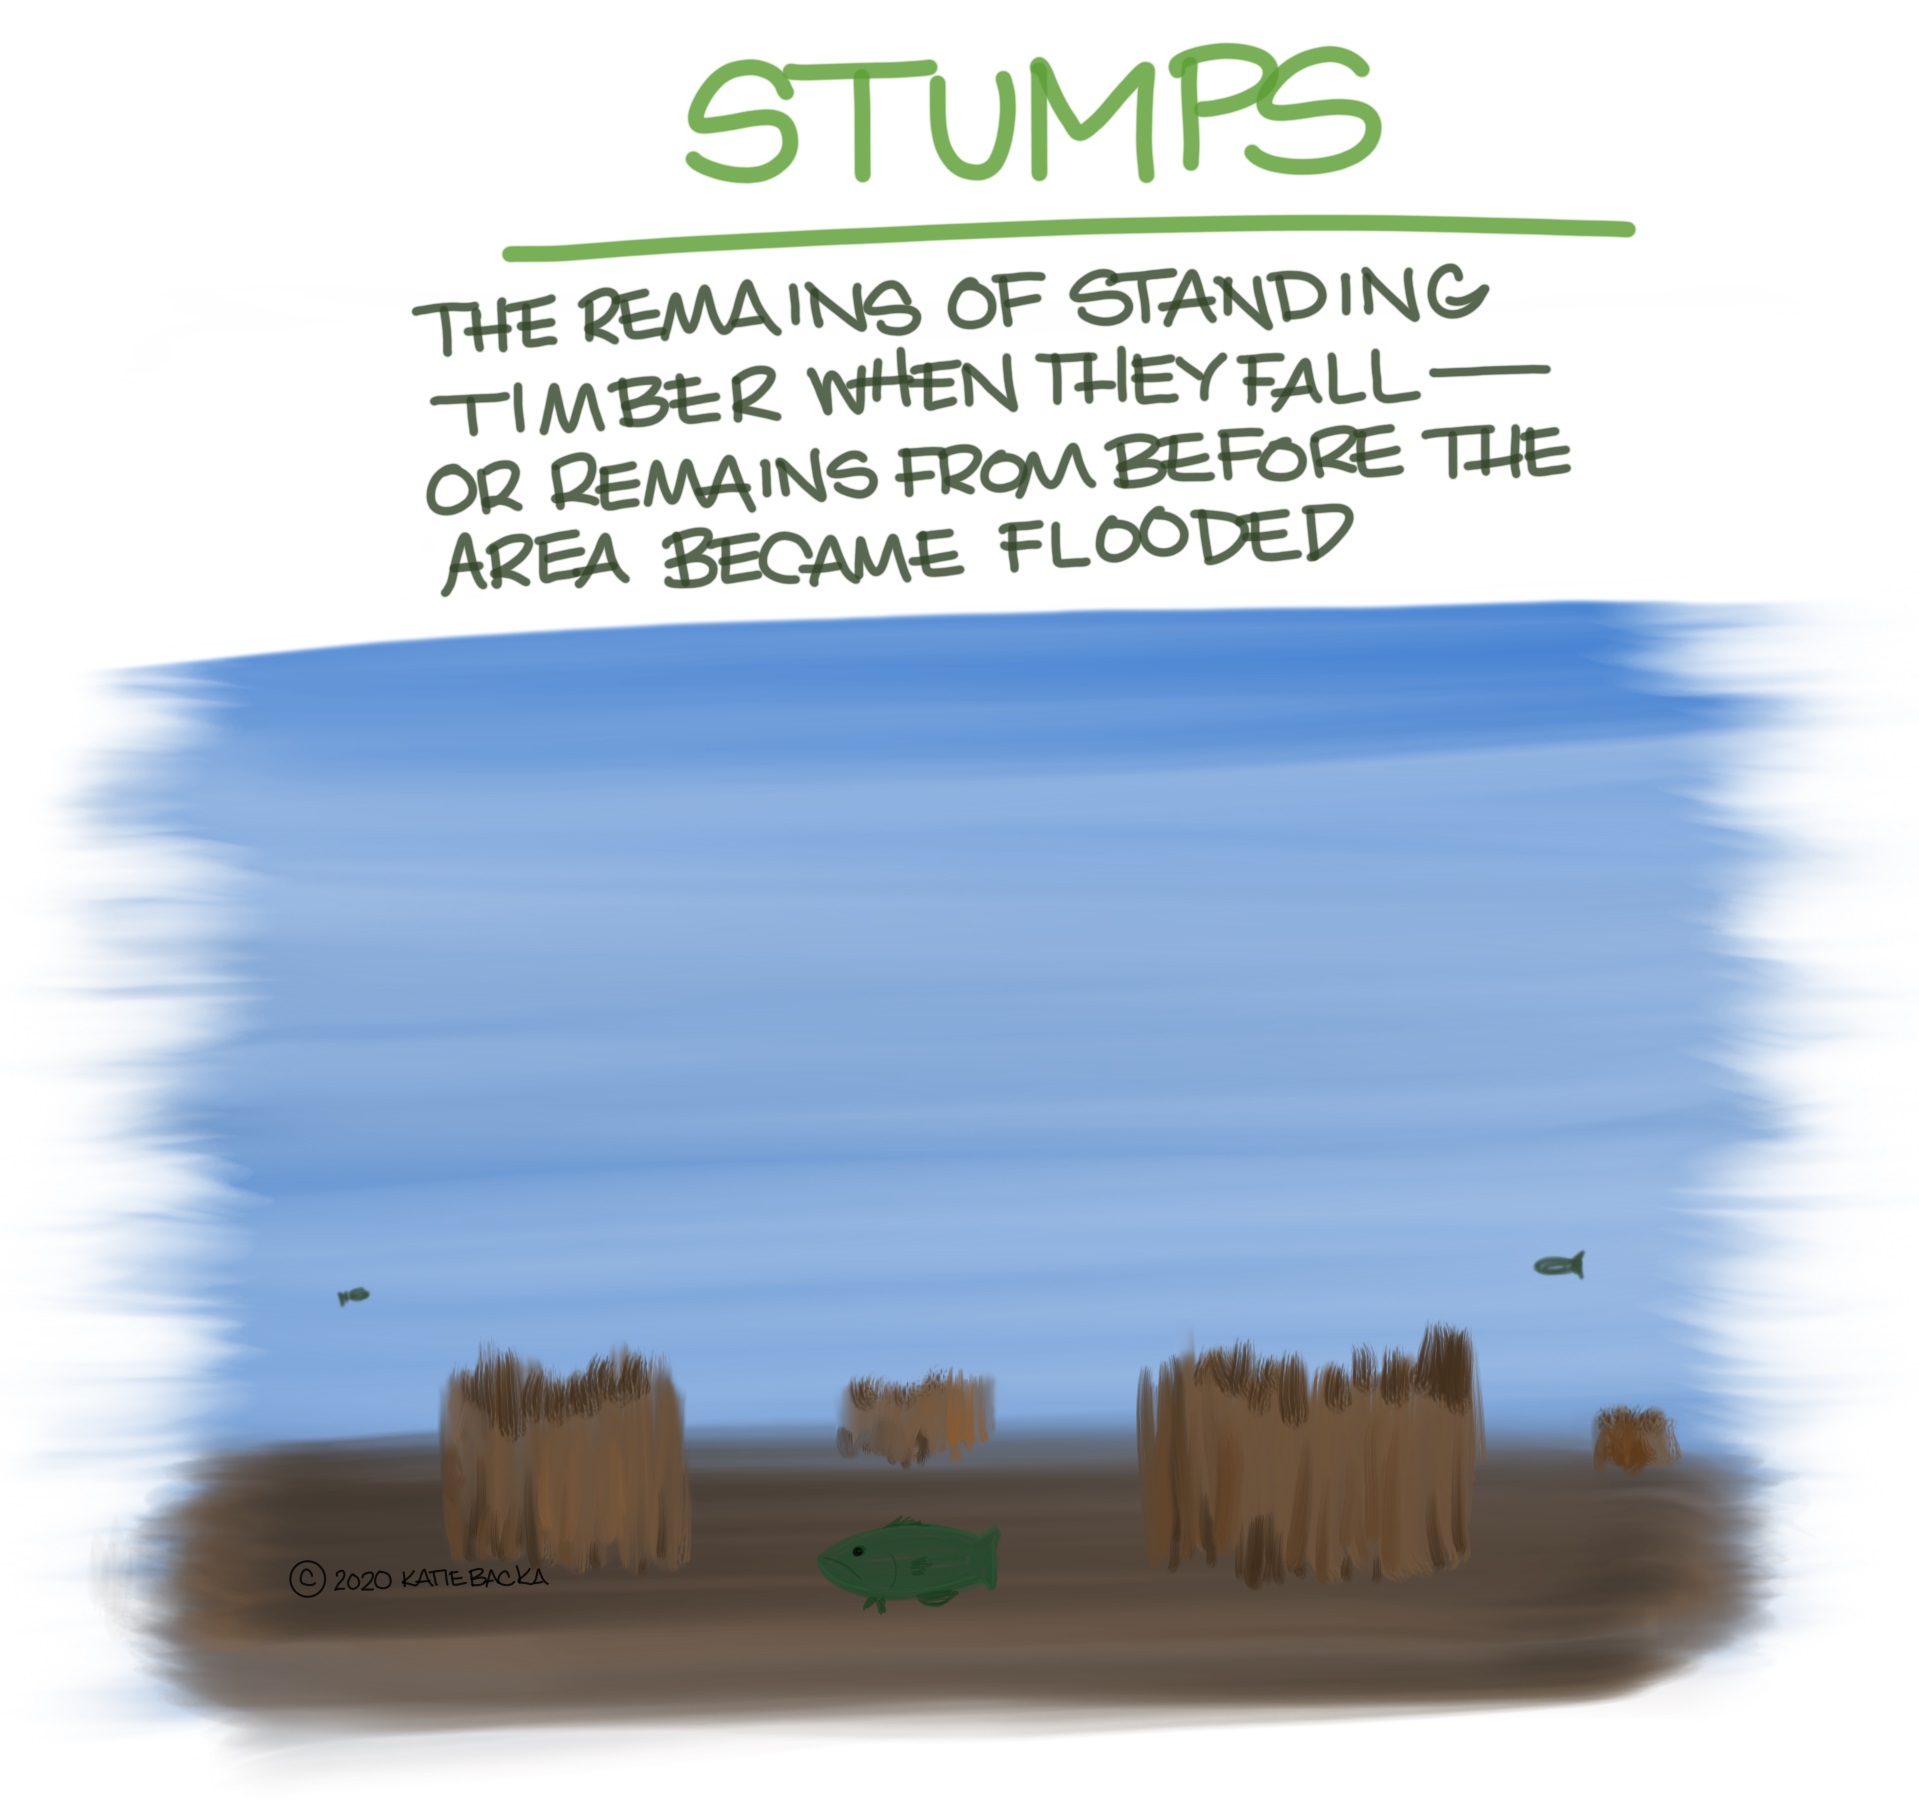 Script: Stumps, the remains of standing timber when they fall or remains from before the area became flooded